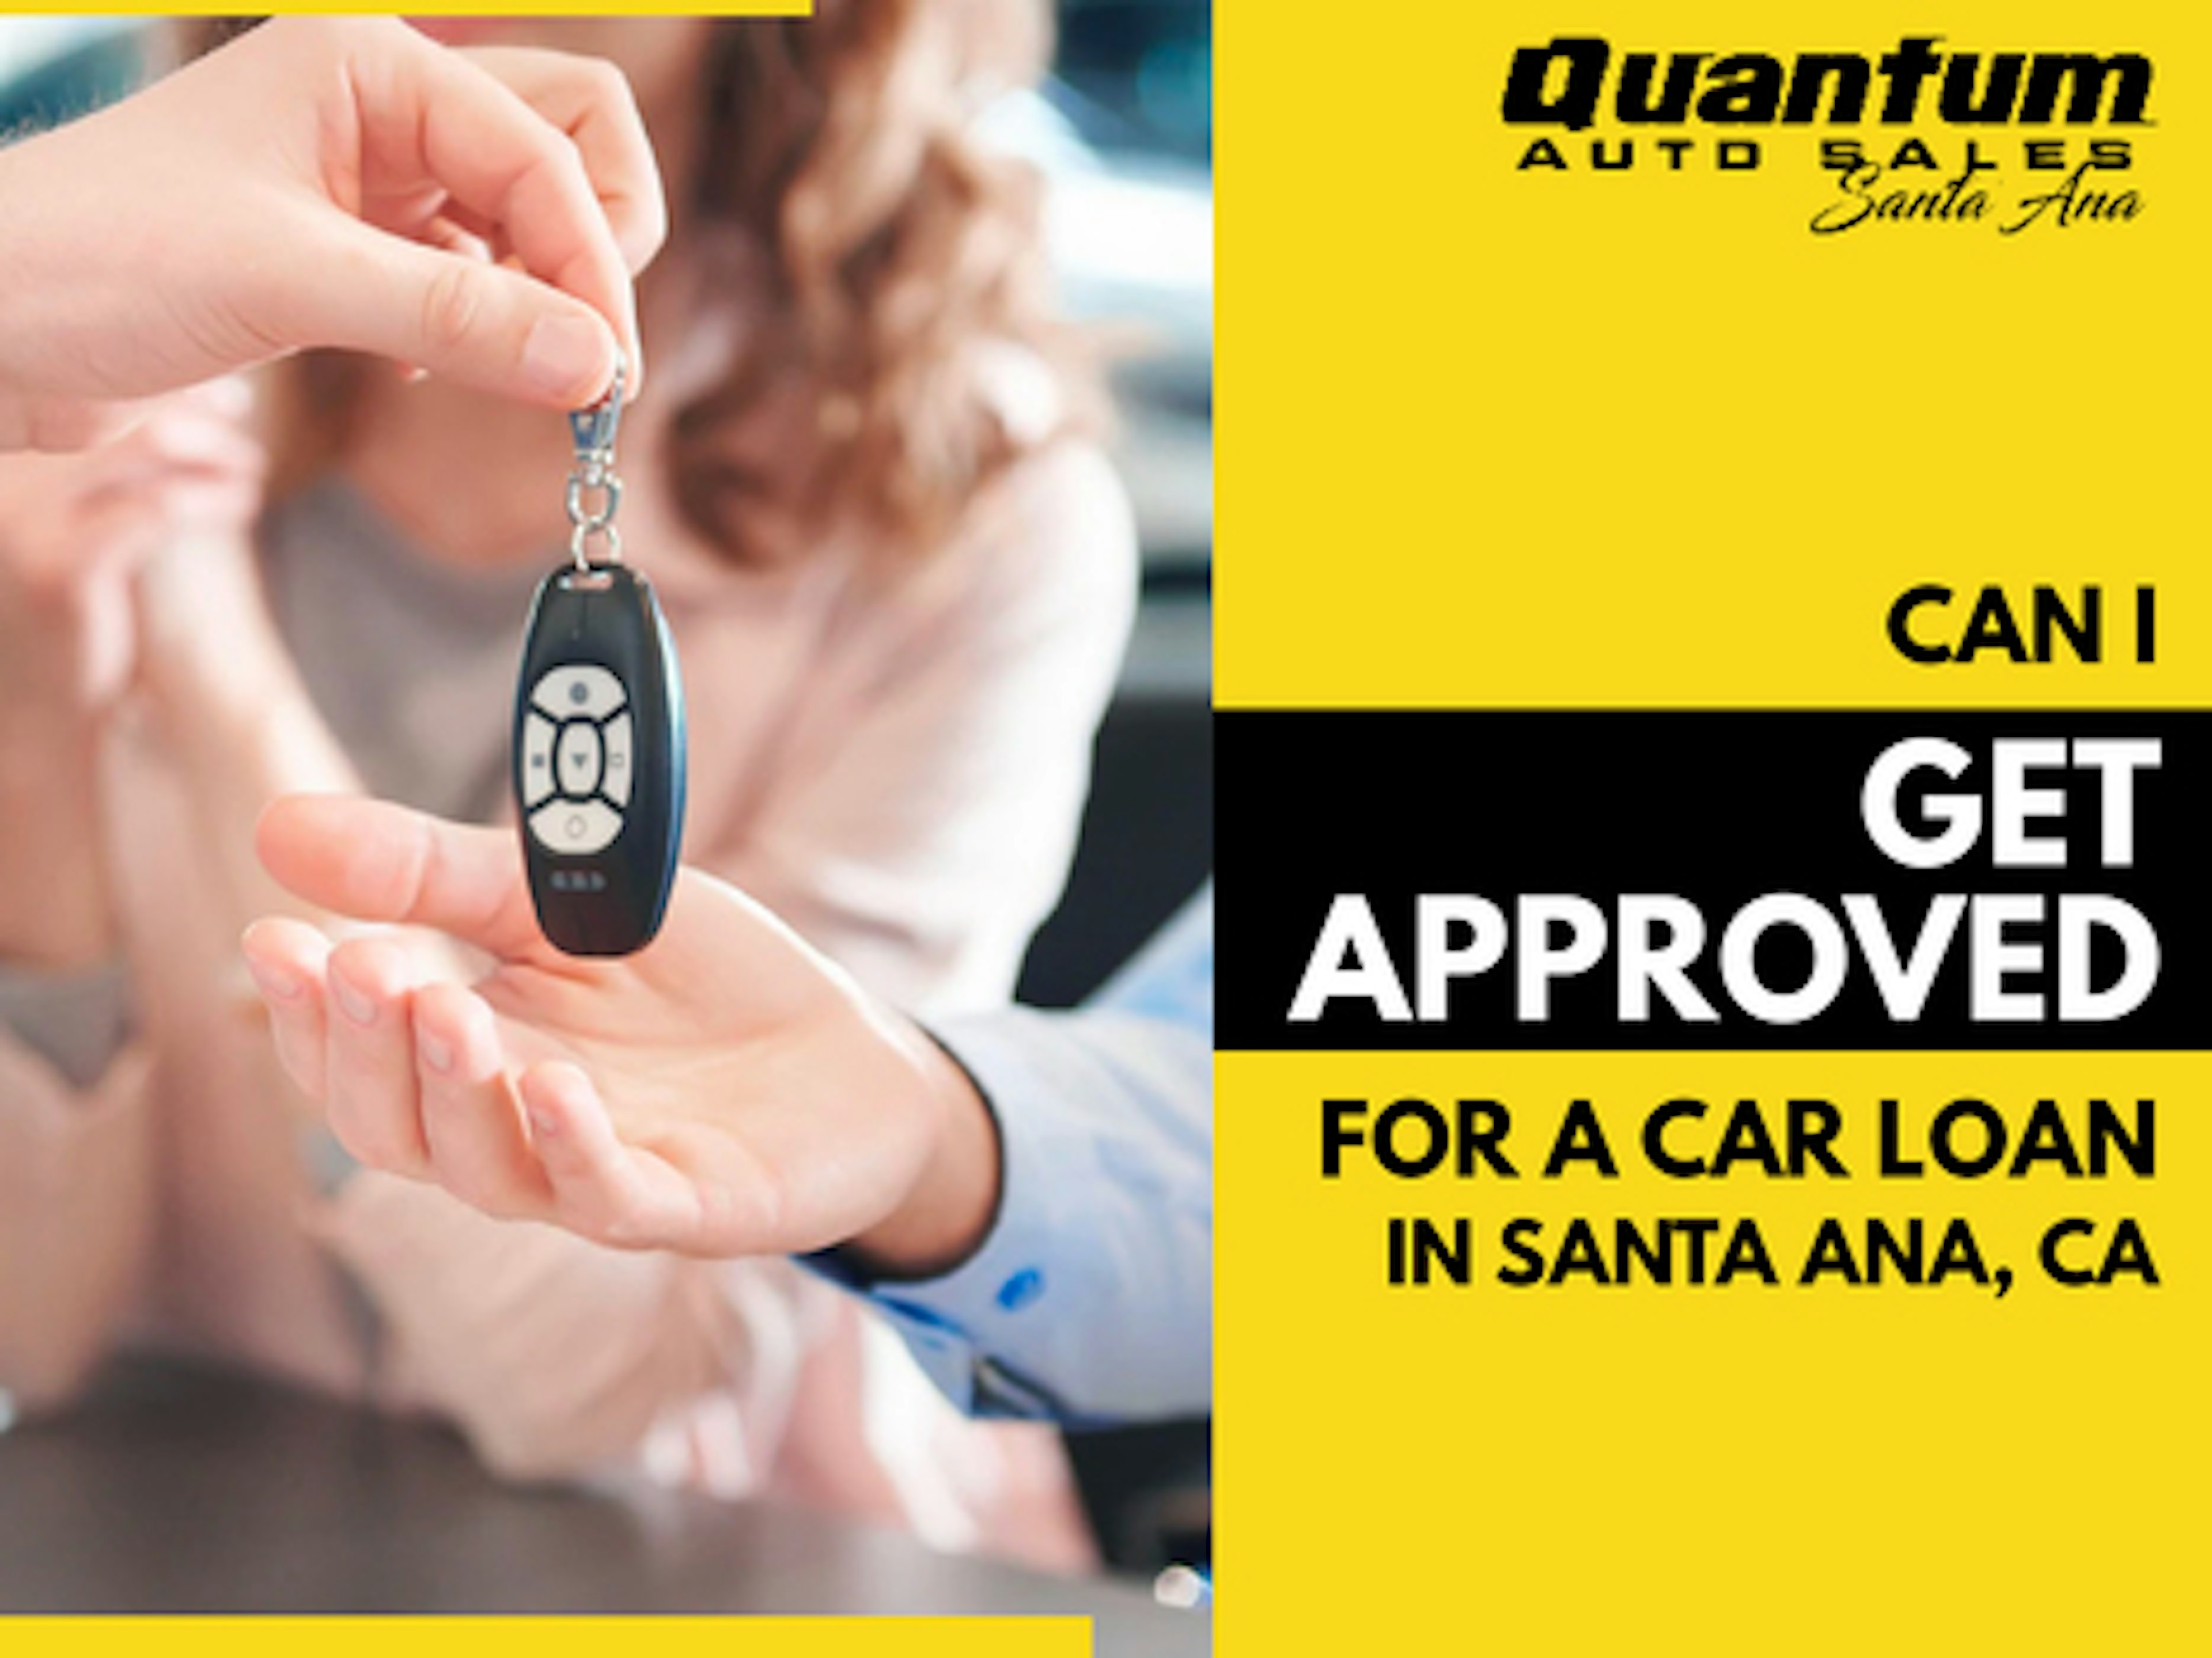 Can I Get Approved for a Car Loan in Santa Ana, Ca